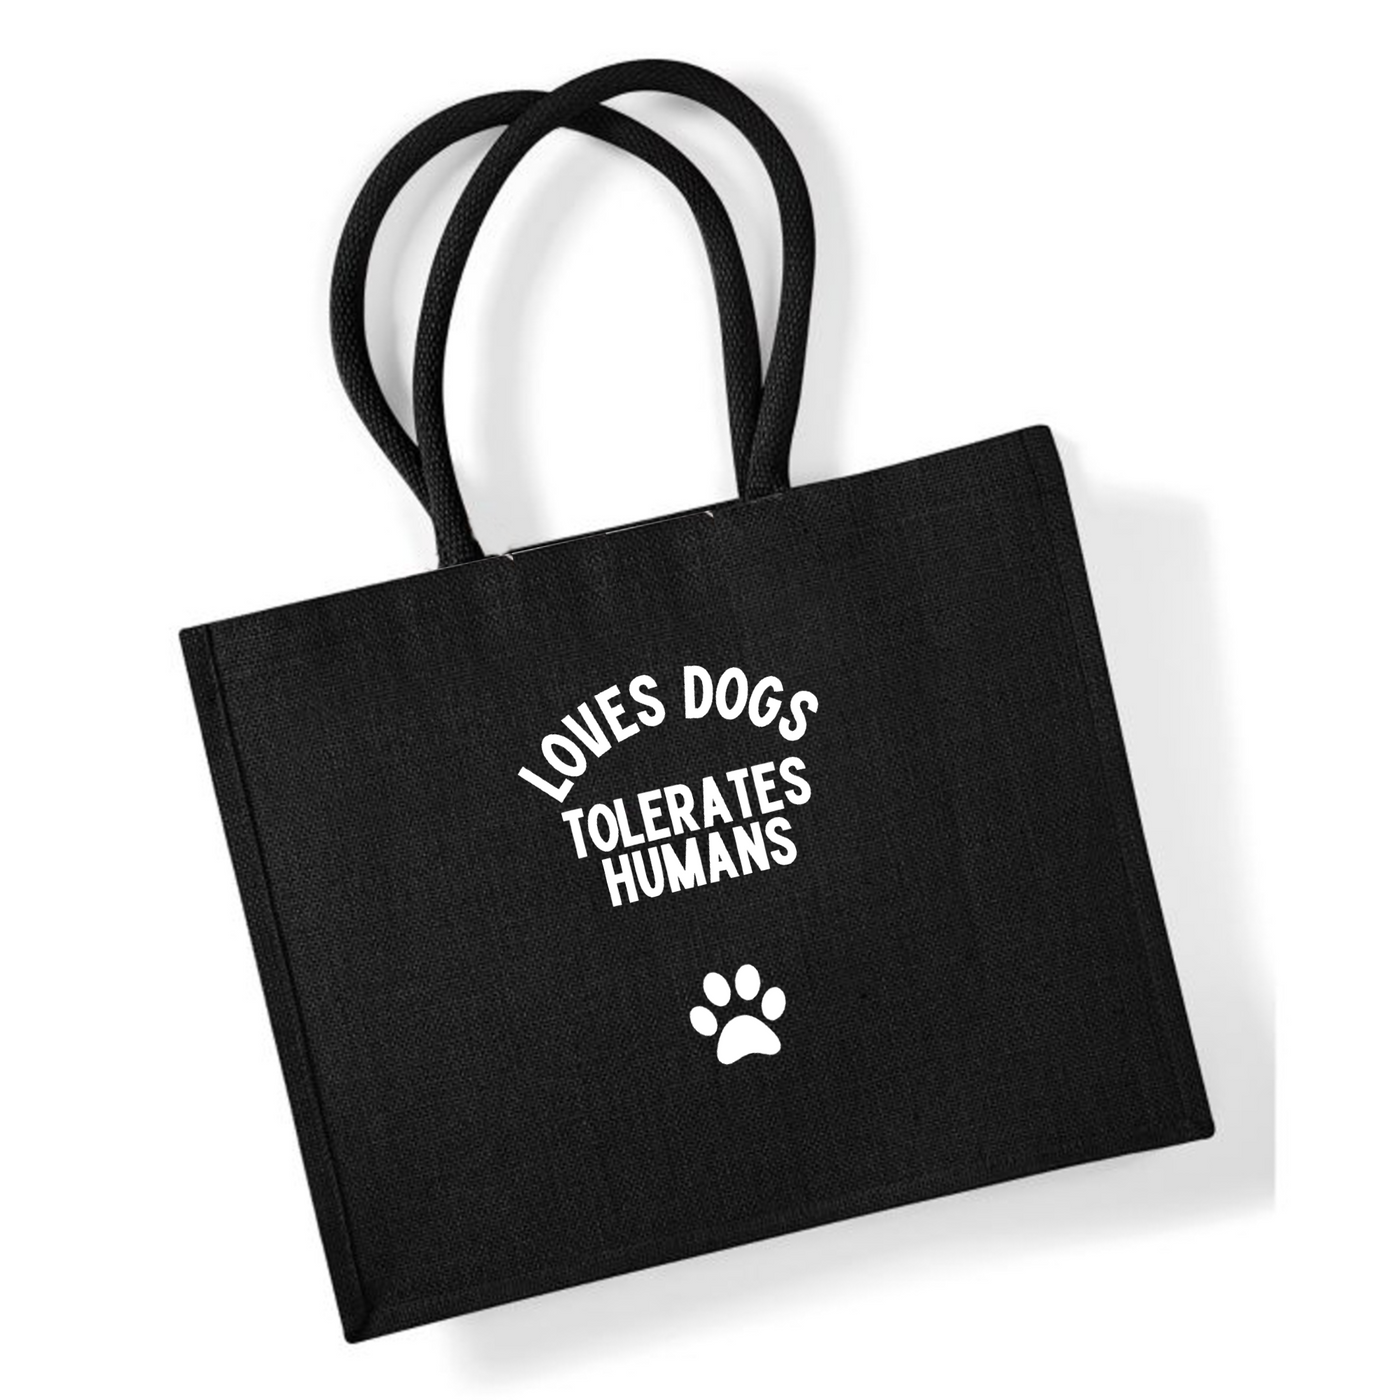 Loves Dogs, Tolerates Humans - Tote Bag